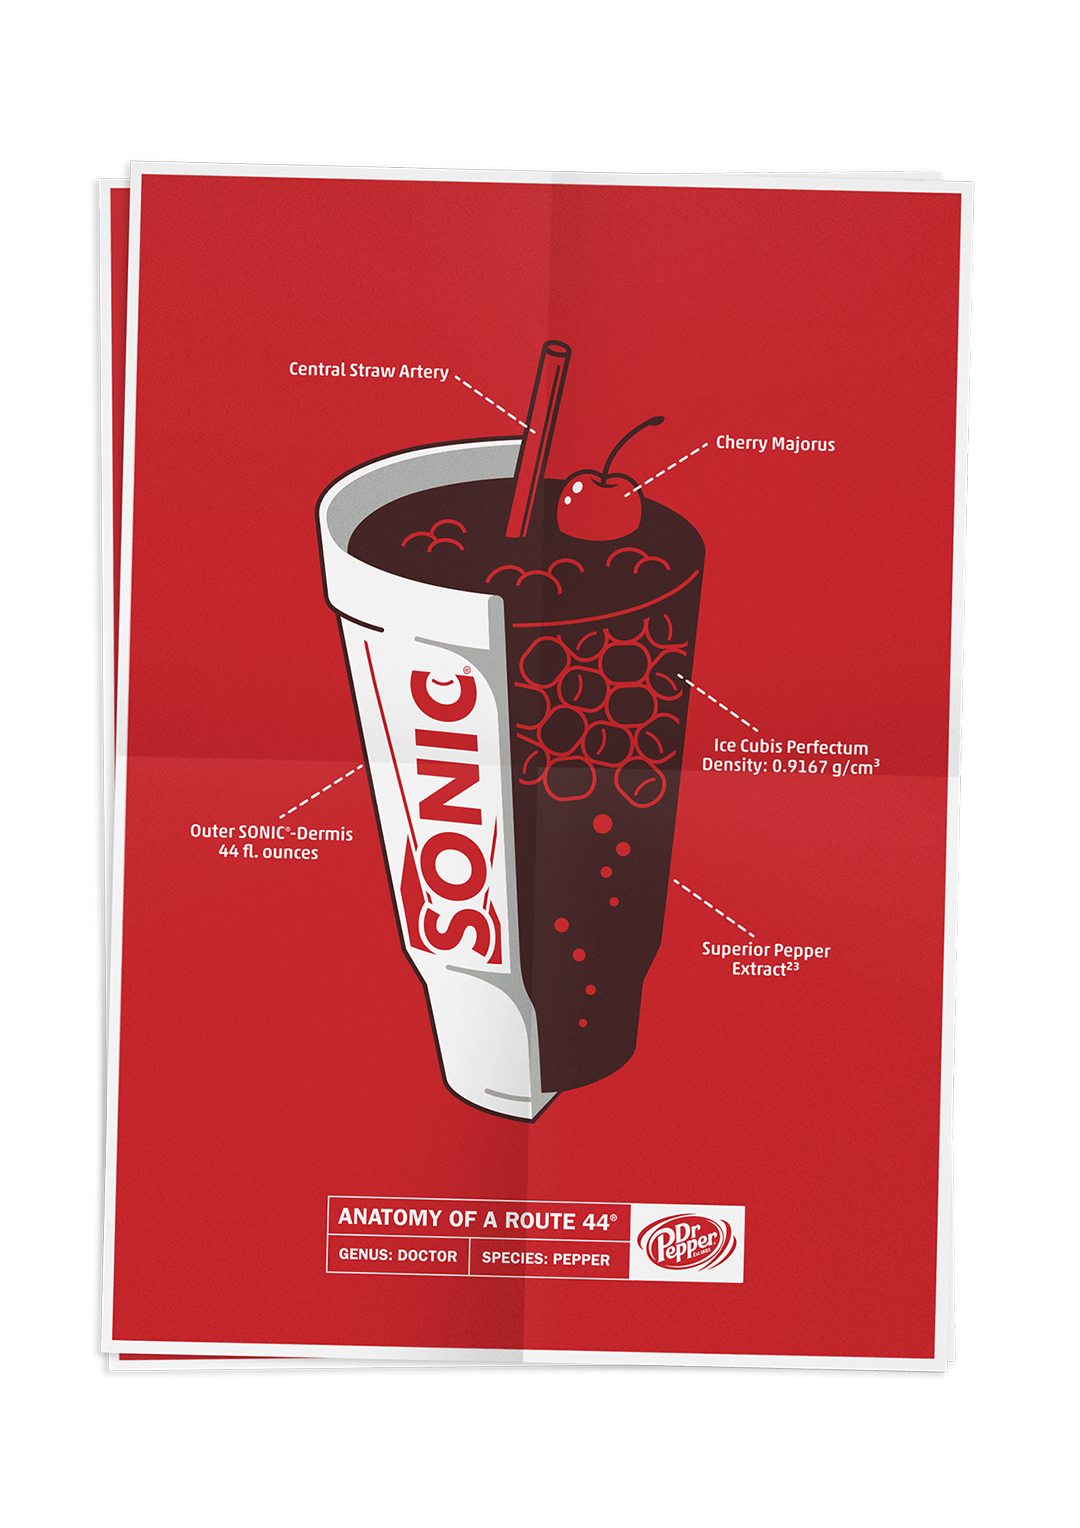 sonic drive-in poster